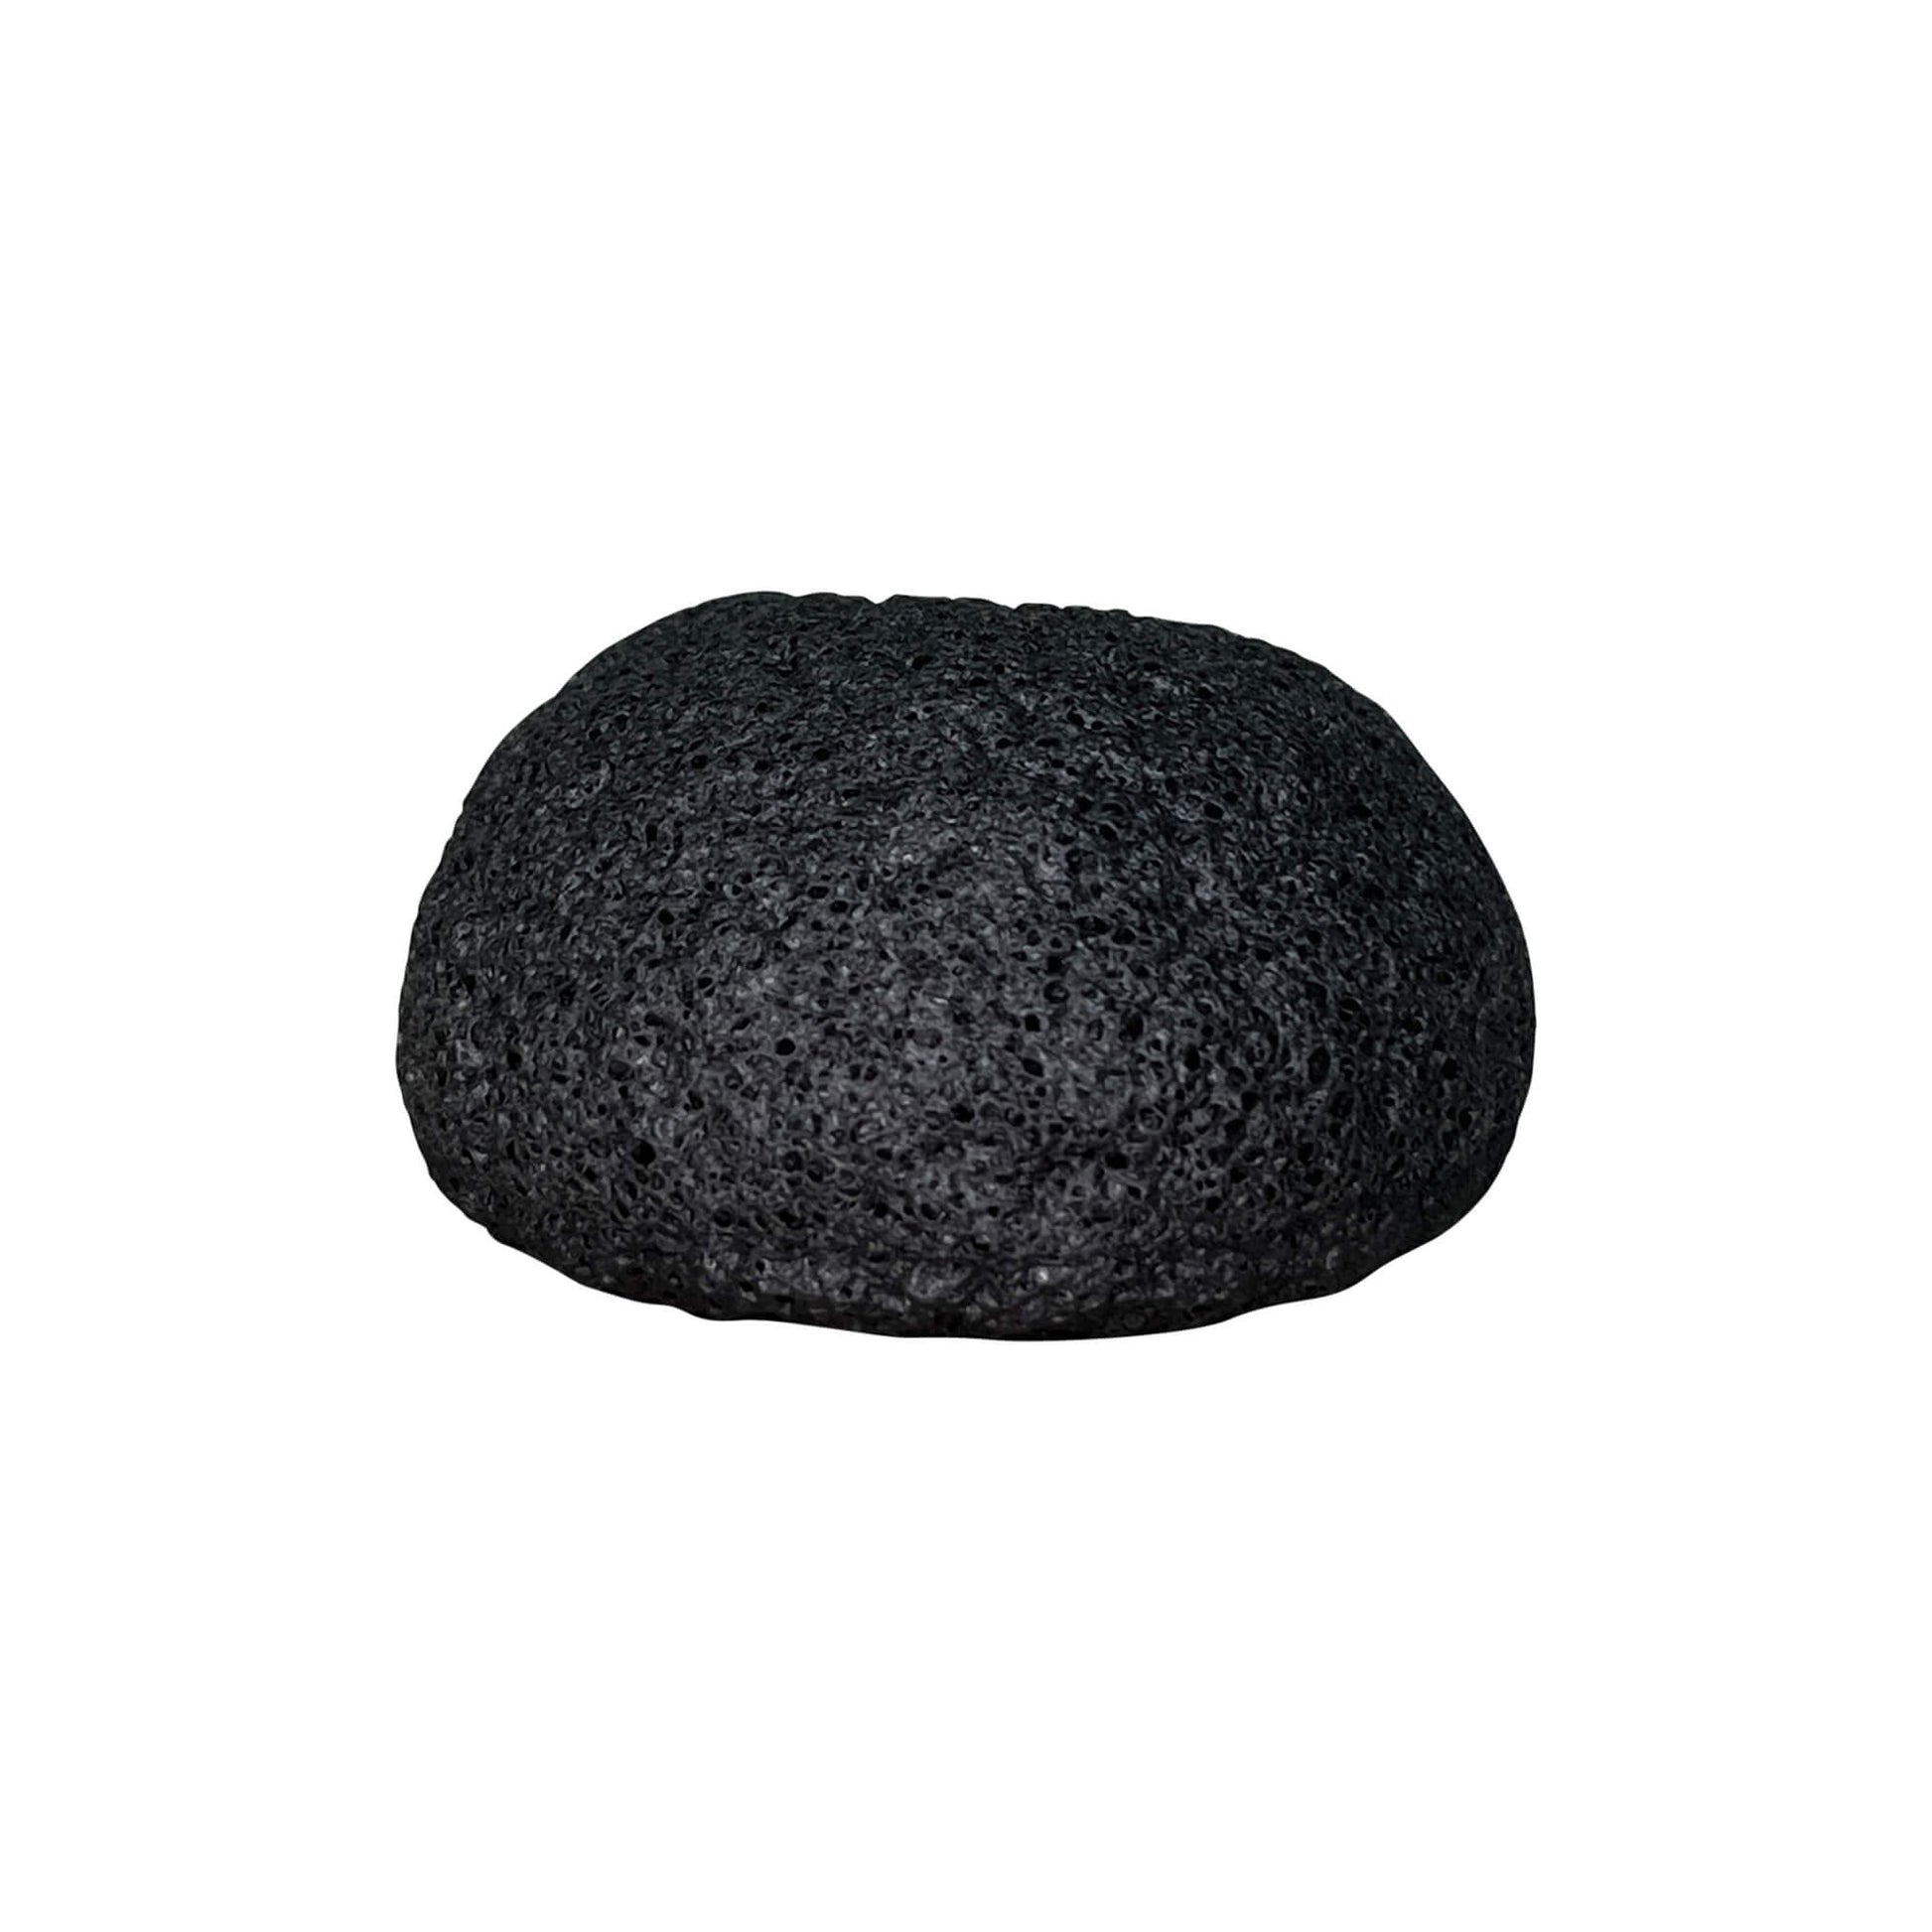 Reveal cleaner, smoother skin with our  Cruisin Organics Konjac Sponge. This all-natural, plant fiber sponge offers a gentle yet effective exfoliation for your daily facial routine. Made from biodegradable konjac root fibers, it's the perfect addition to your cleansing routine. Say goodbye to impurities and hello to a radiant complexion.